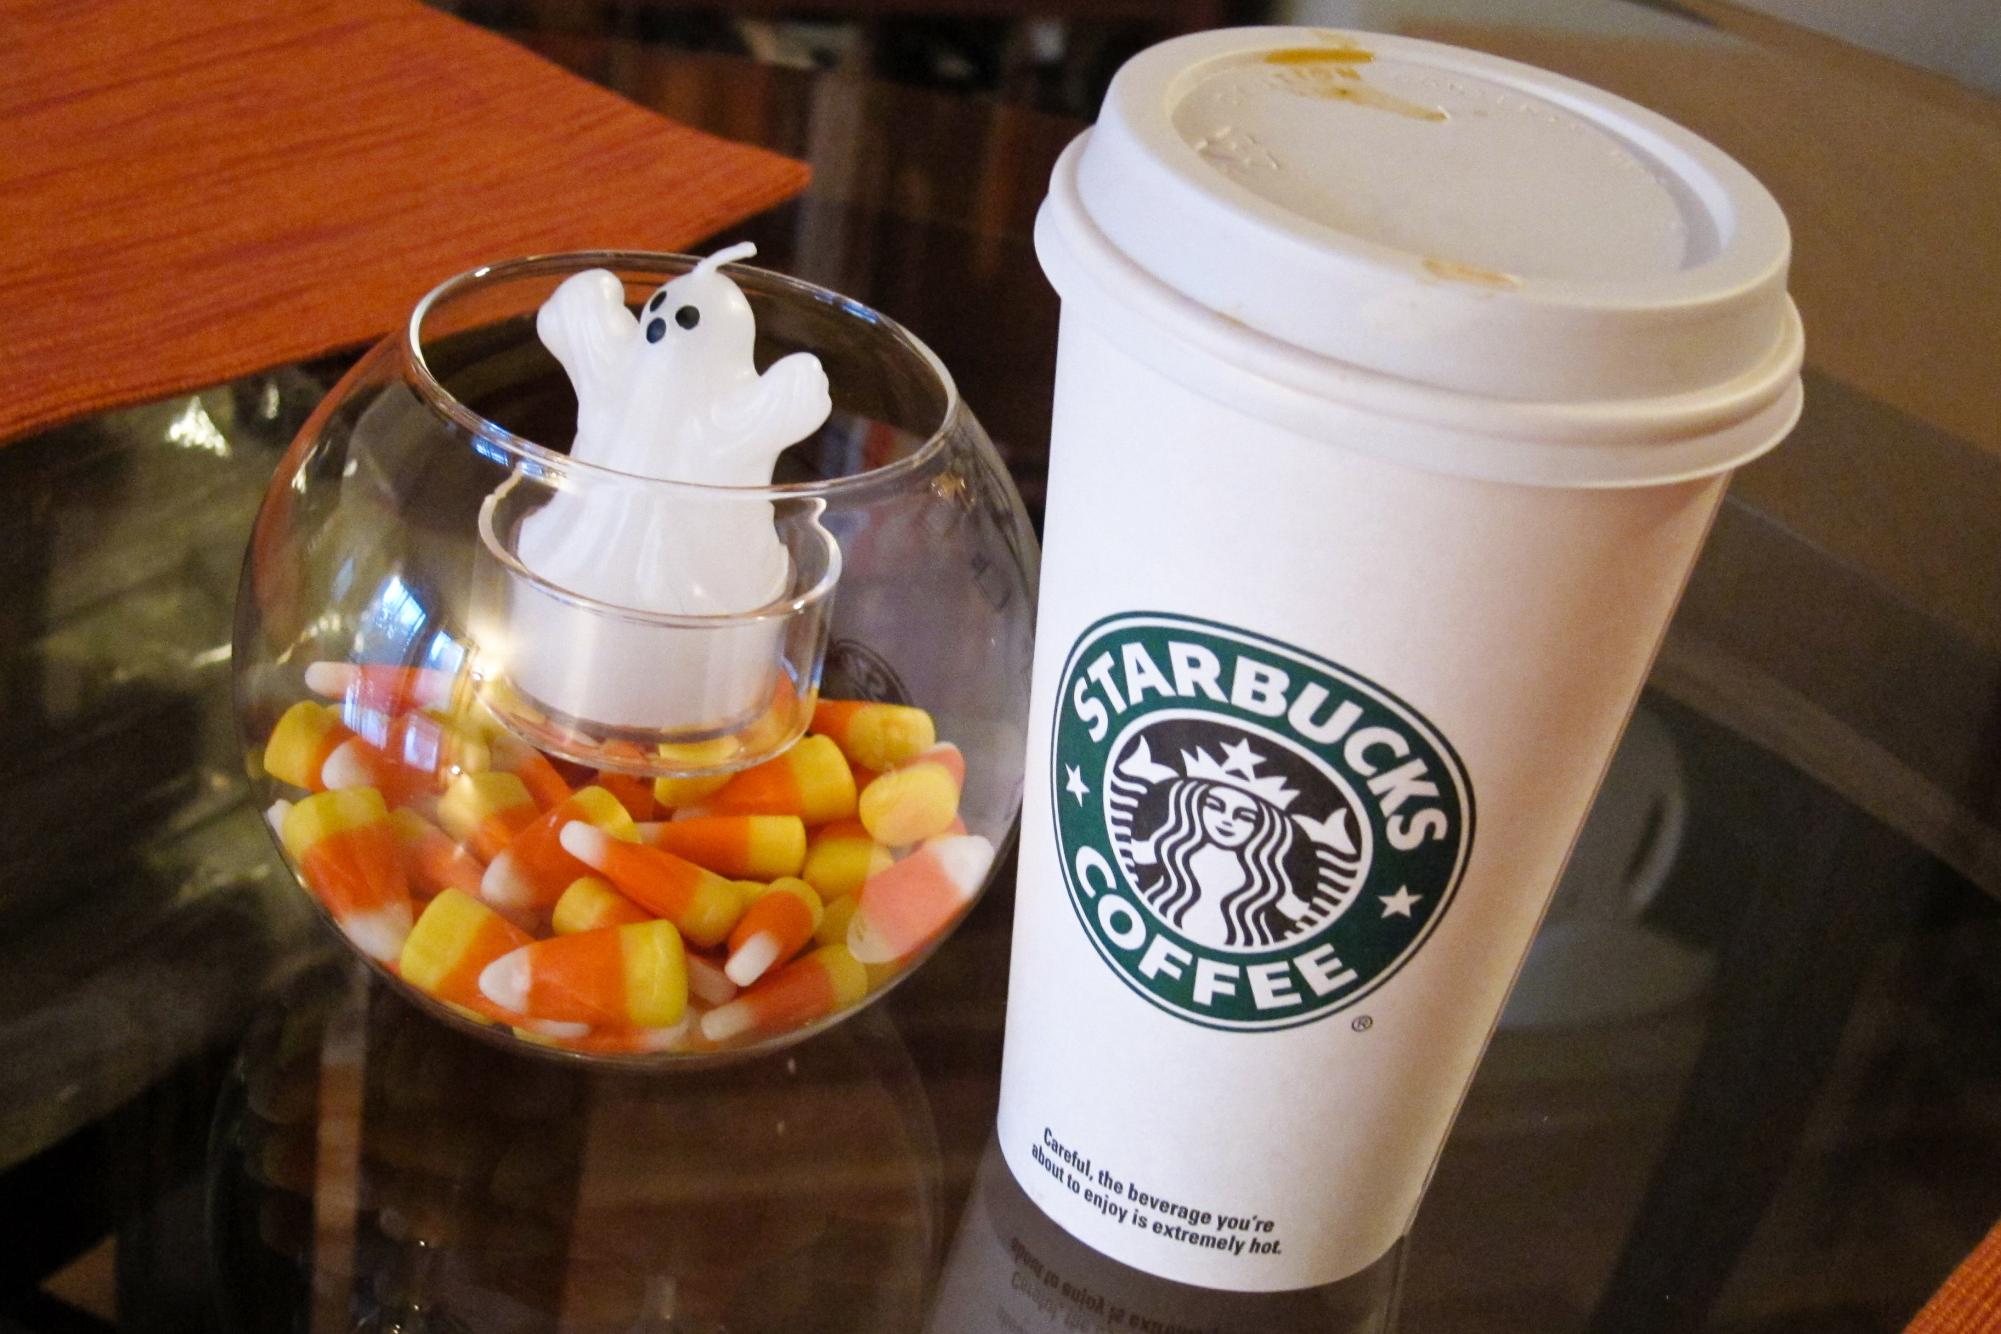 As the fall season begins, Starbucks is busy releasing two brand new drinks to celebrate the cooler weather and fall vibes.